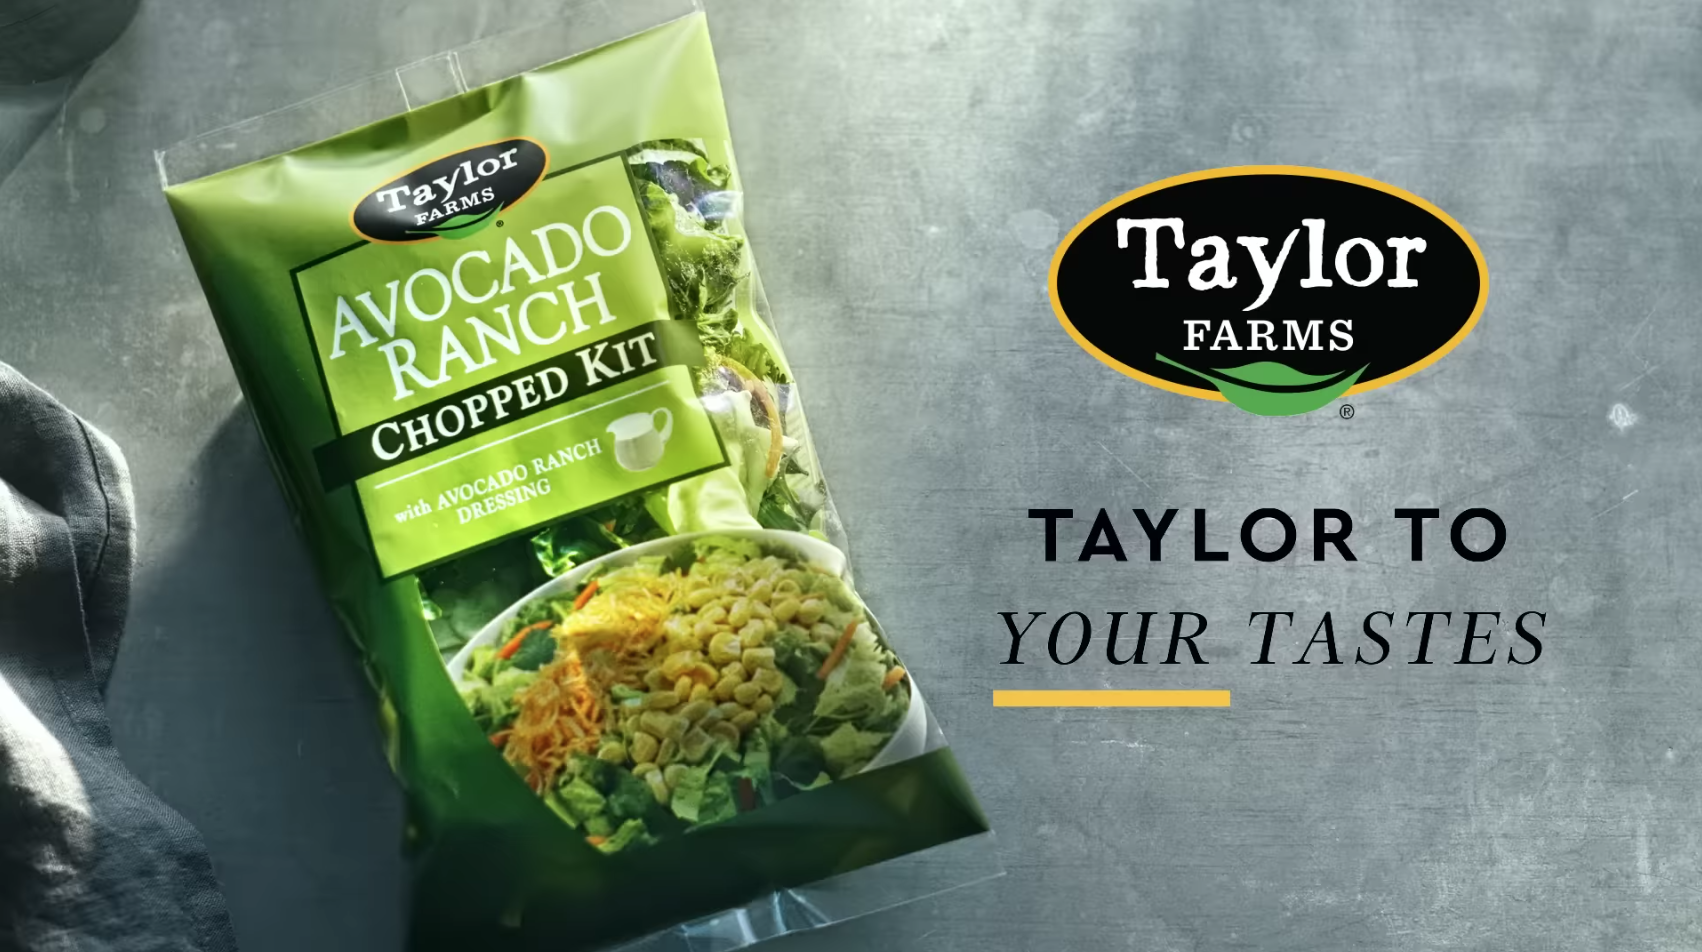 https://www.taylorfarms.com/wp-content/uploads/2021/04/Avocado-Ranch-Chopped-Salad-YouTube-Video.png